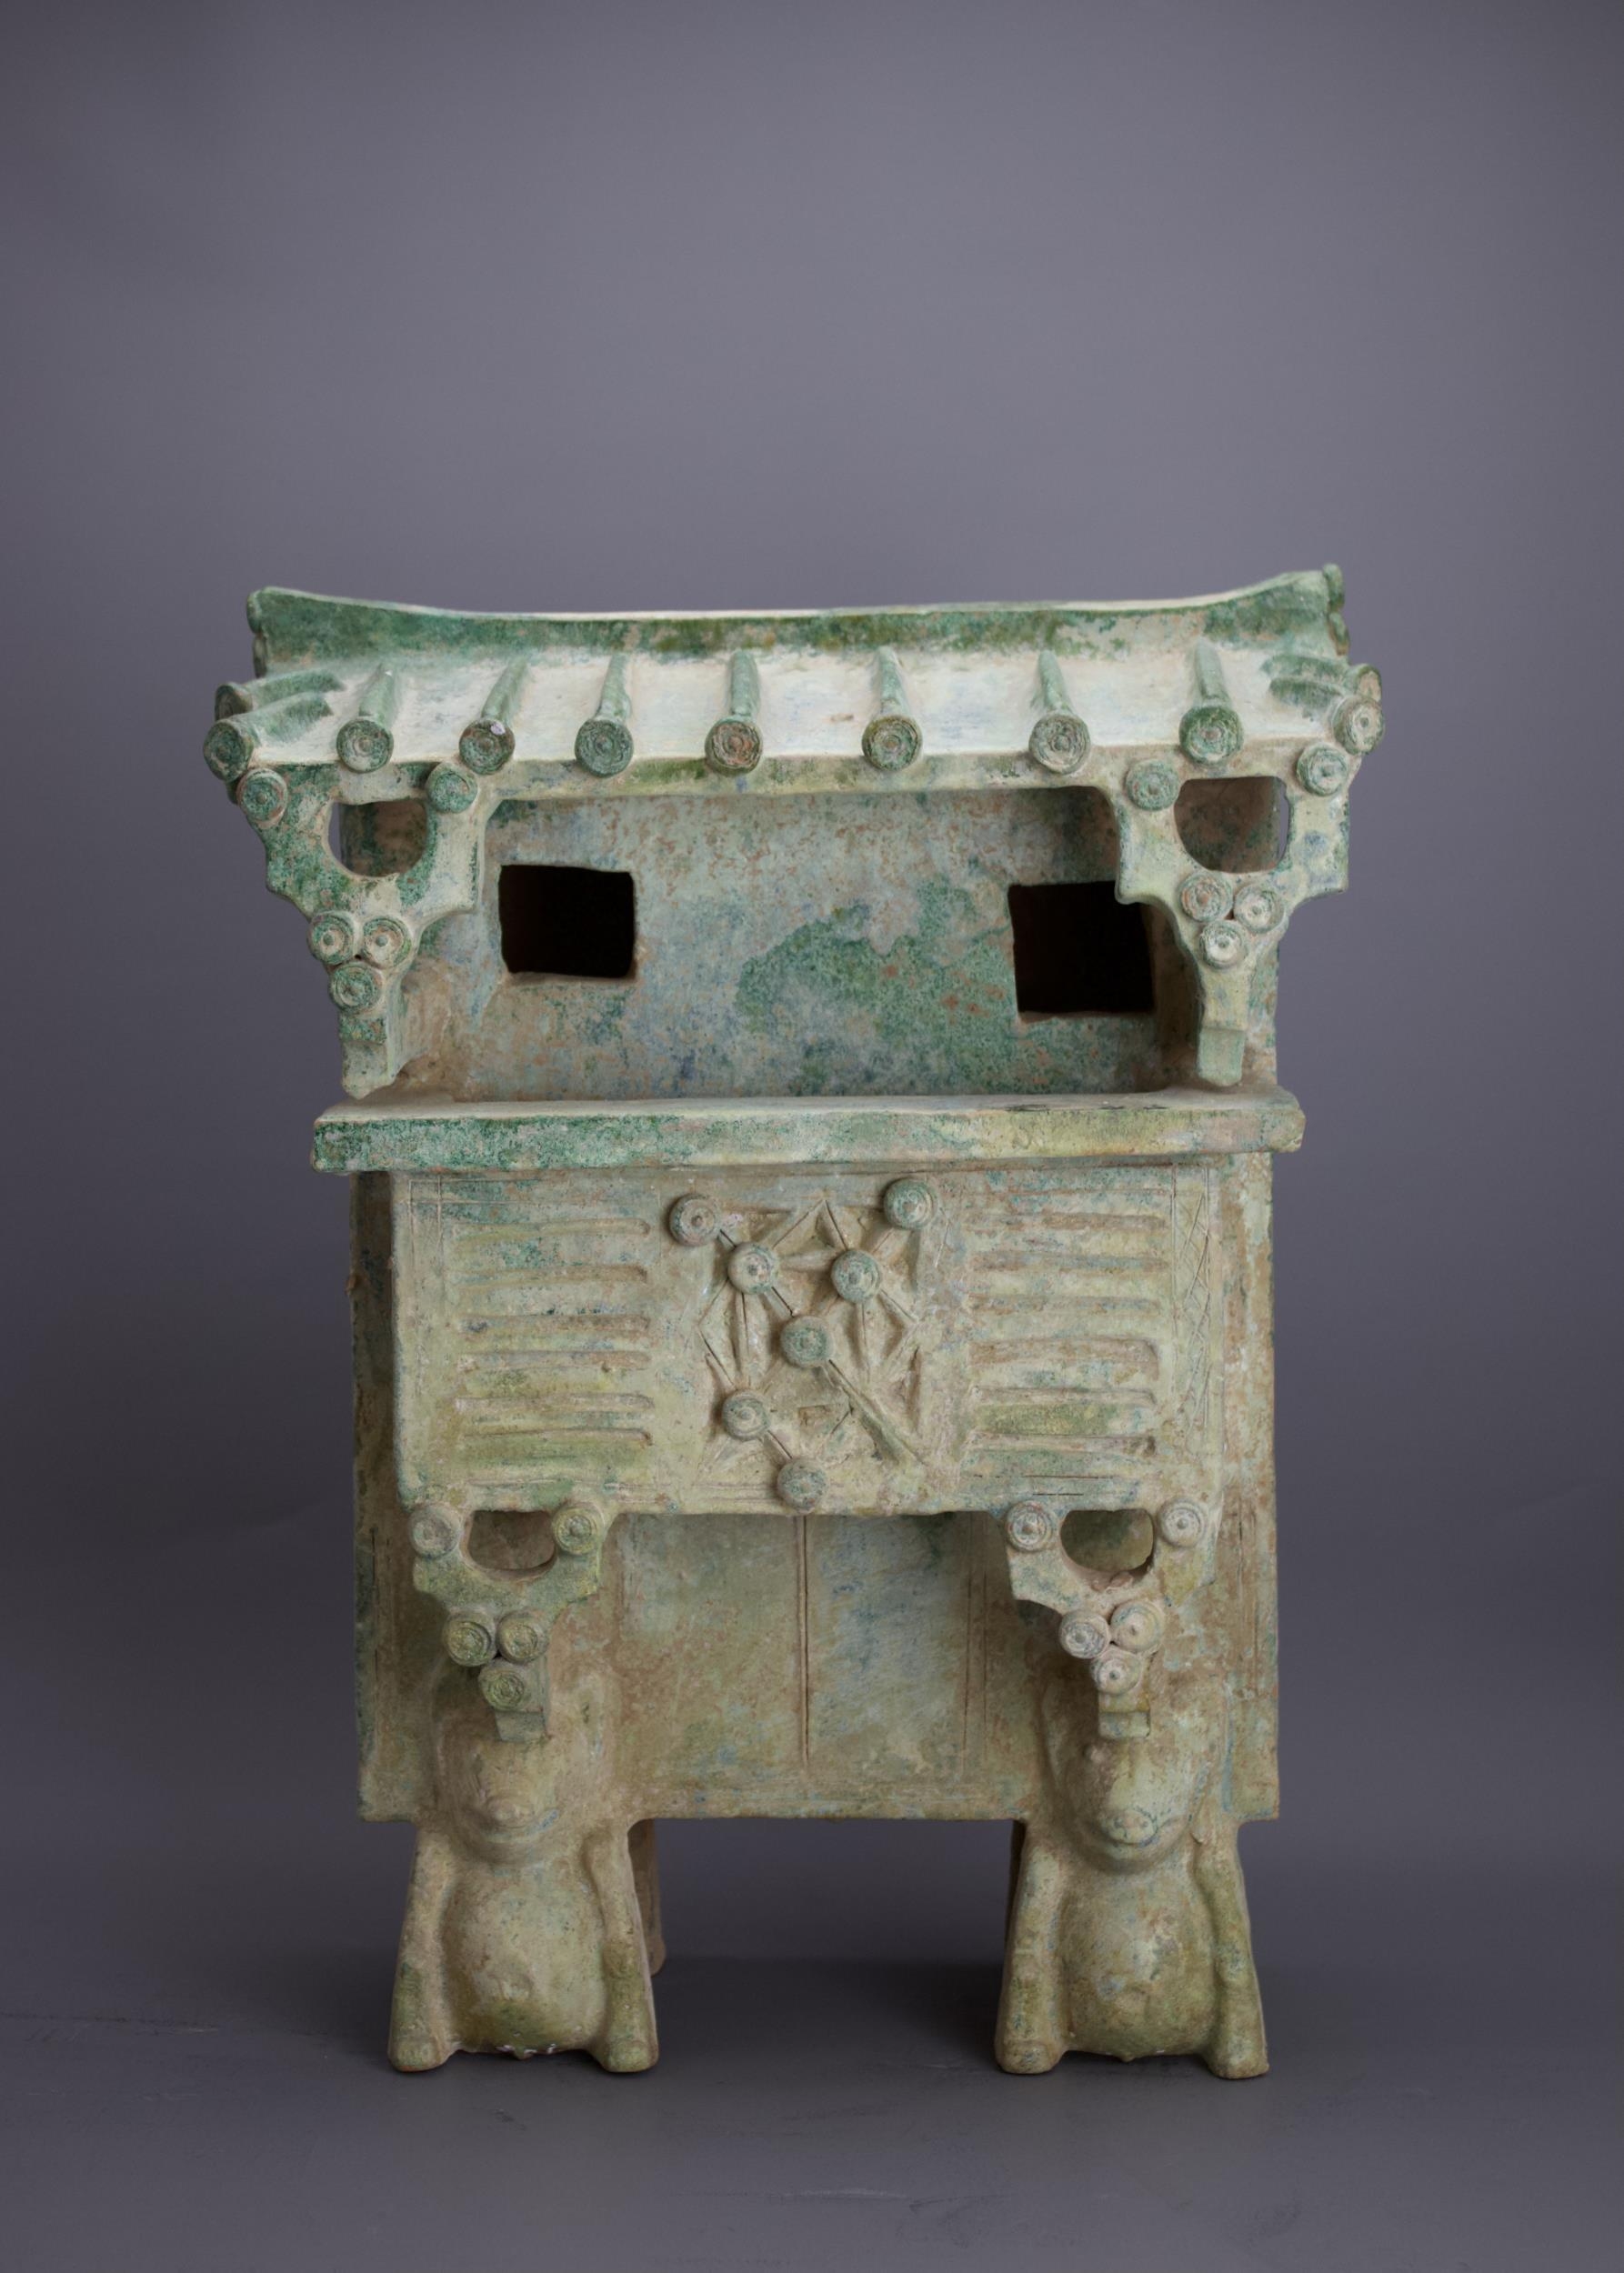 A rare green glazed pottery Watchtower, Han Dynasty - - H 46cm W 34cm D 21.5cm - - raised on four - Image 7 of 8